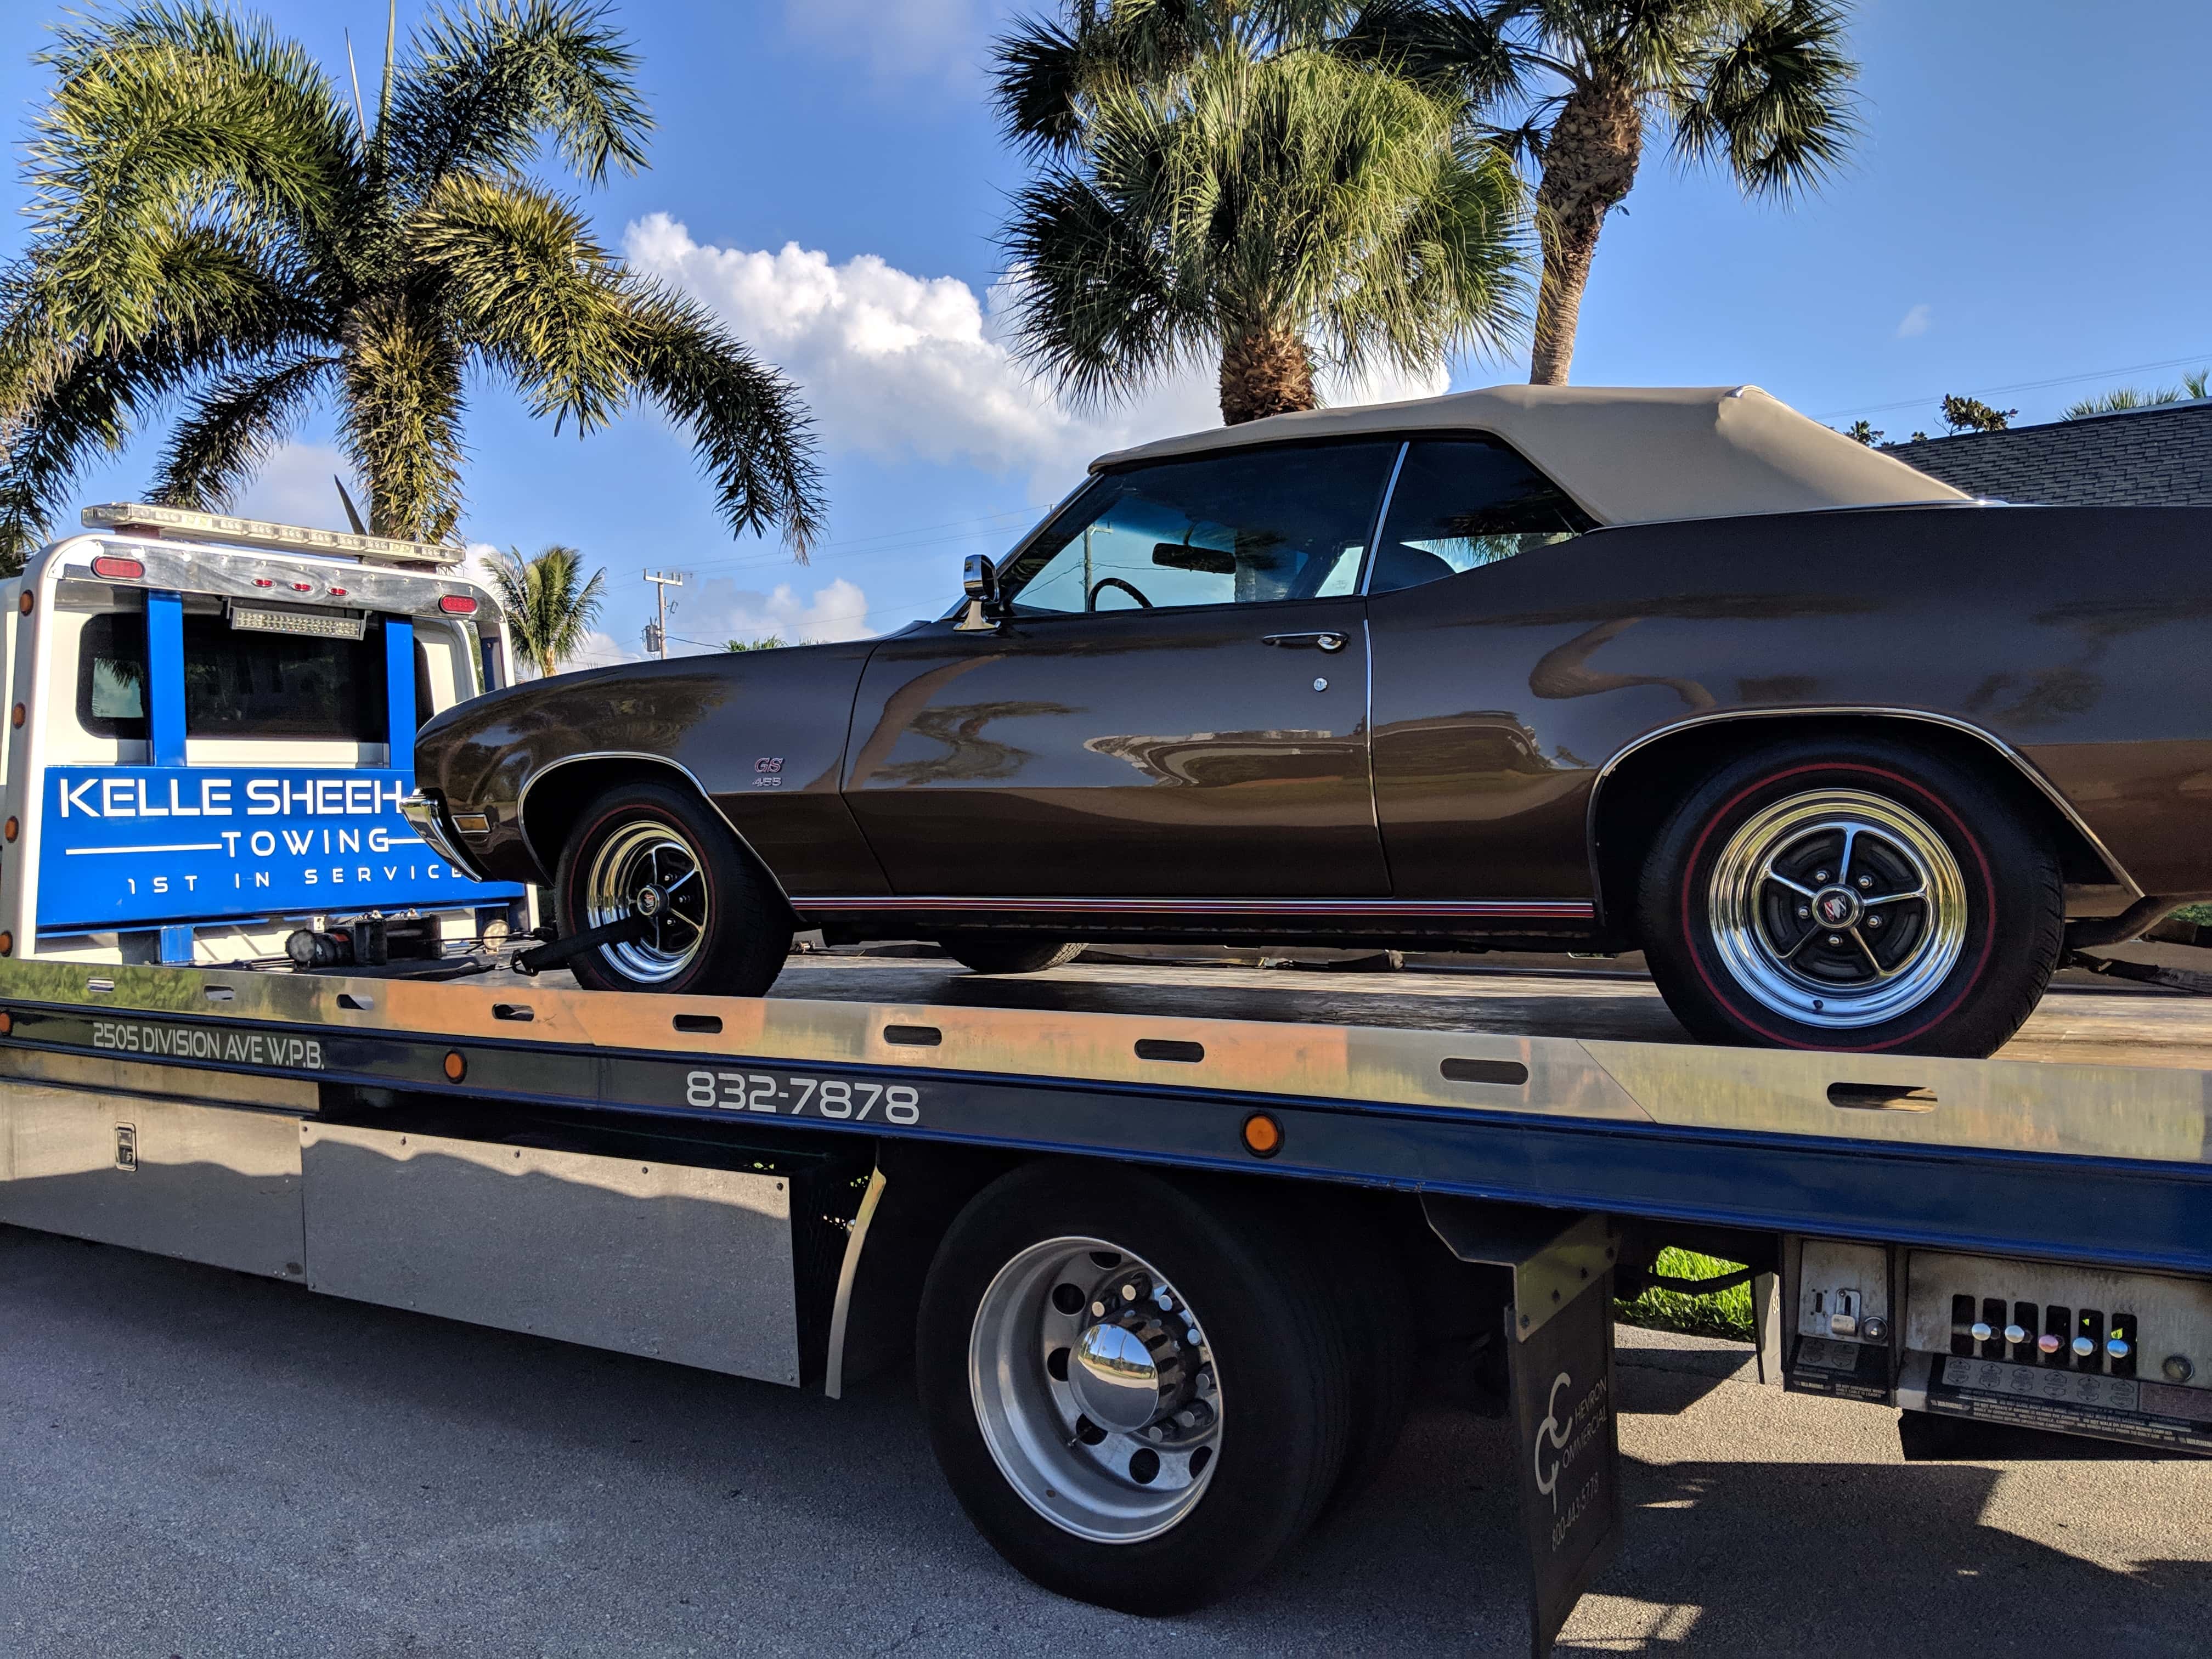 Kelle Sheehan's Towing LLC - West Palm Beach, FL, US, affordable towing near me